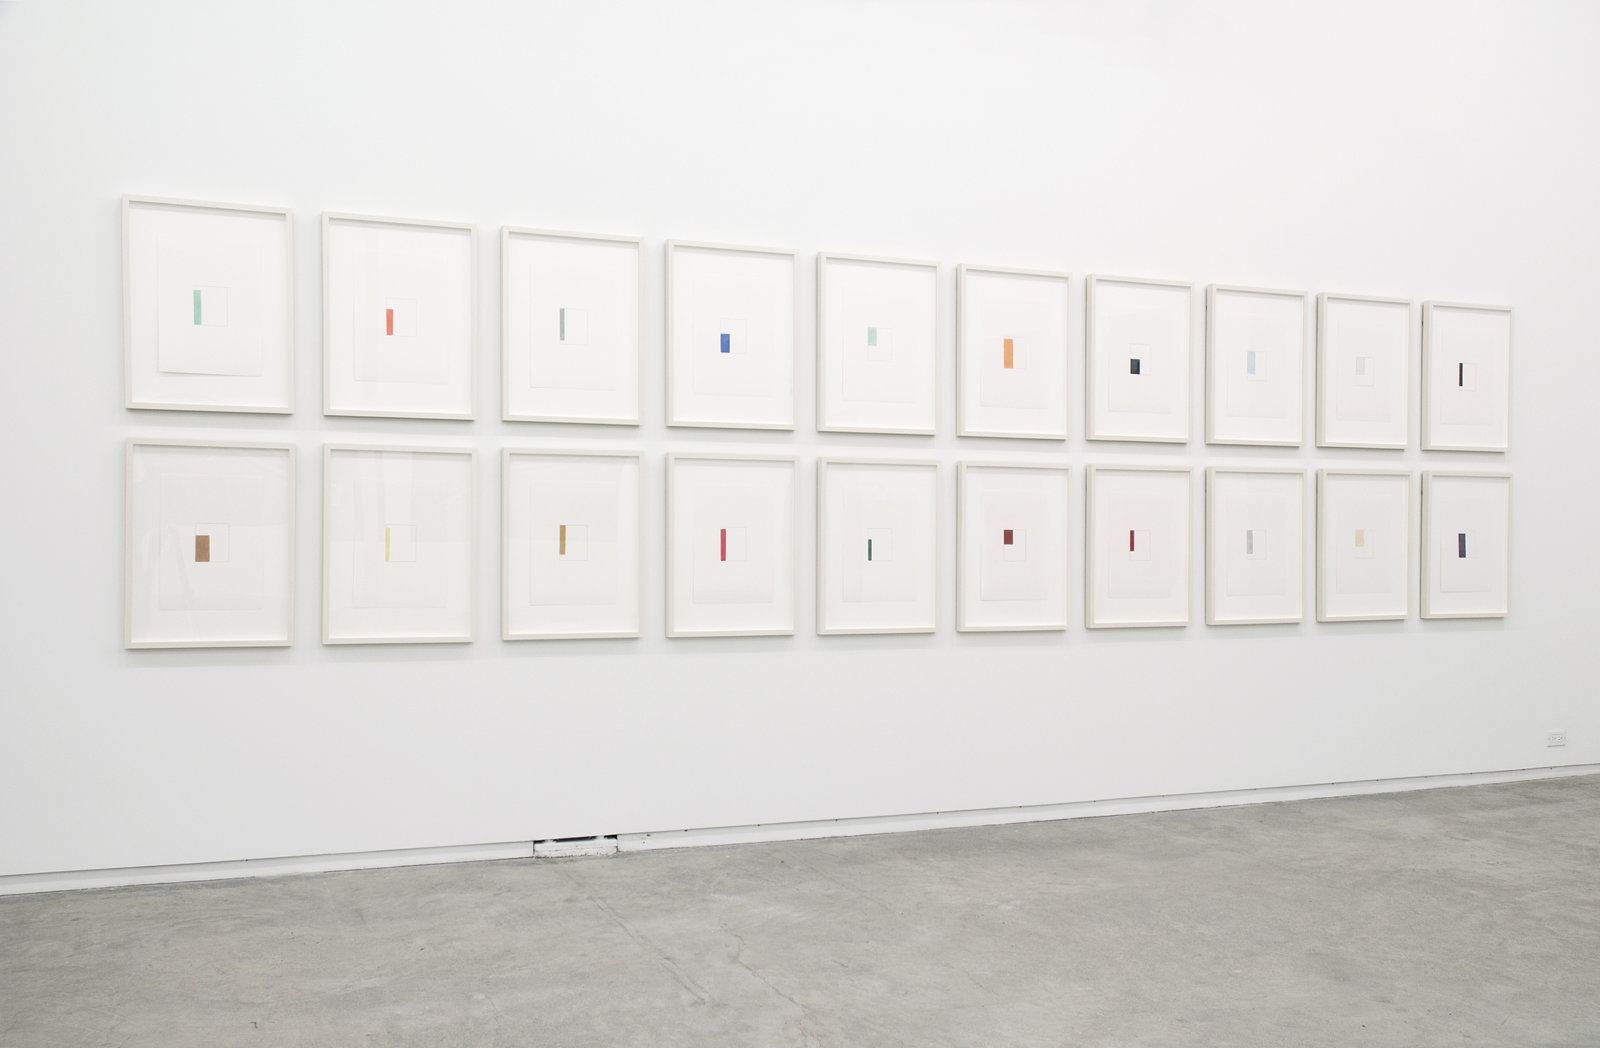 Ian Wallace, Abstract Drawings (Valencia, March 27–29 2004) 1–XX, 2004, 20 coloured pencil on paper drawings, each 17 x 12 in. (42 x 31 cm)